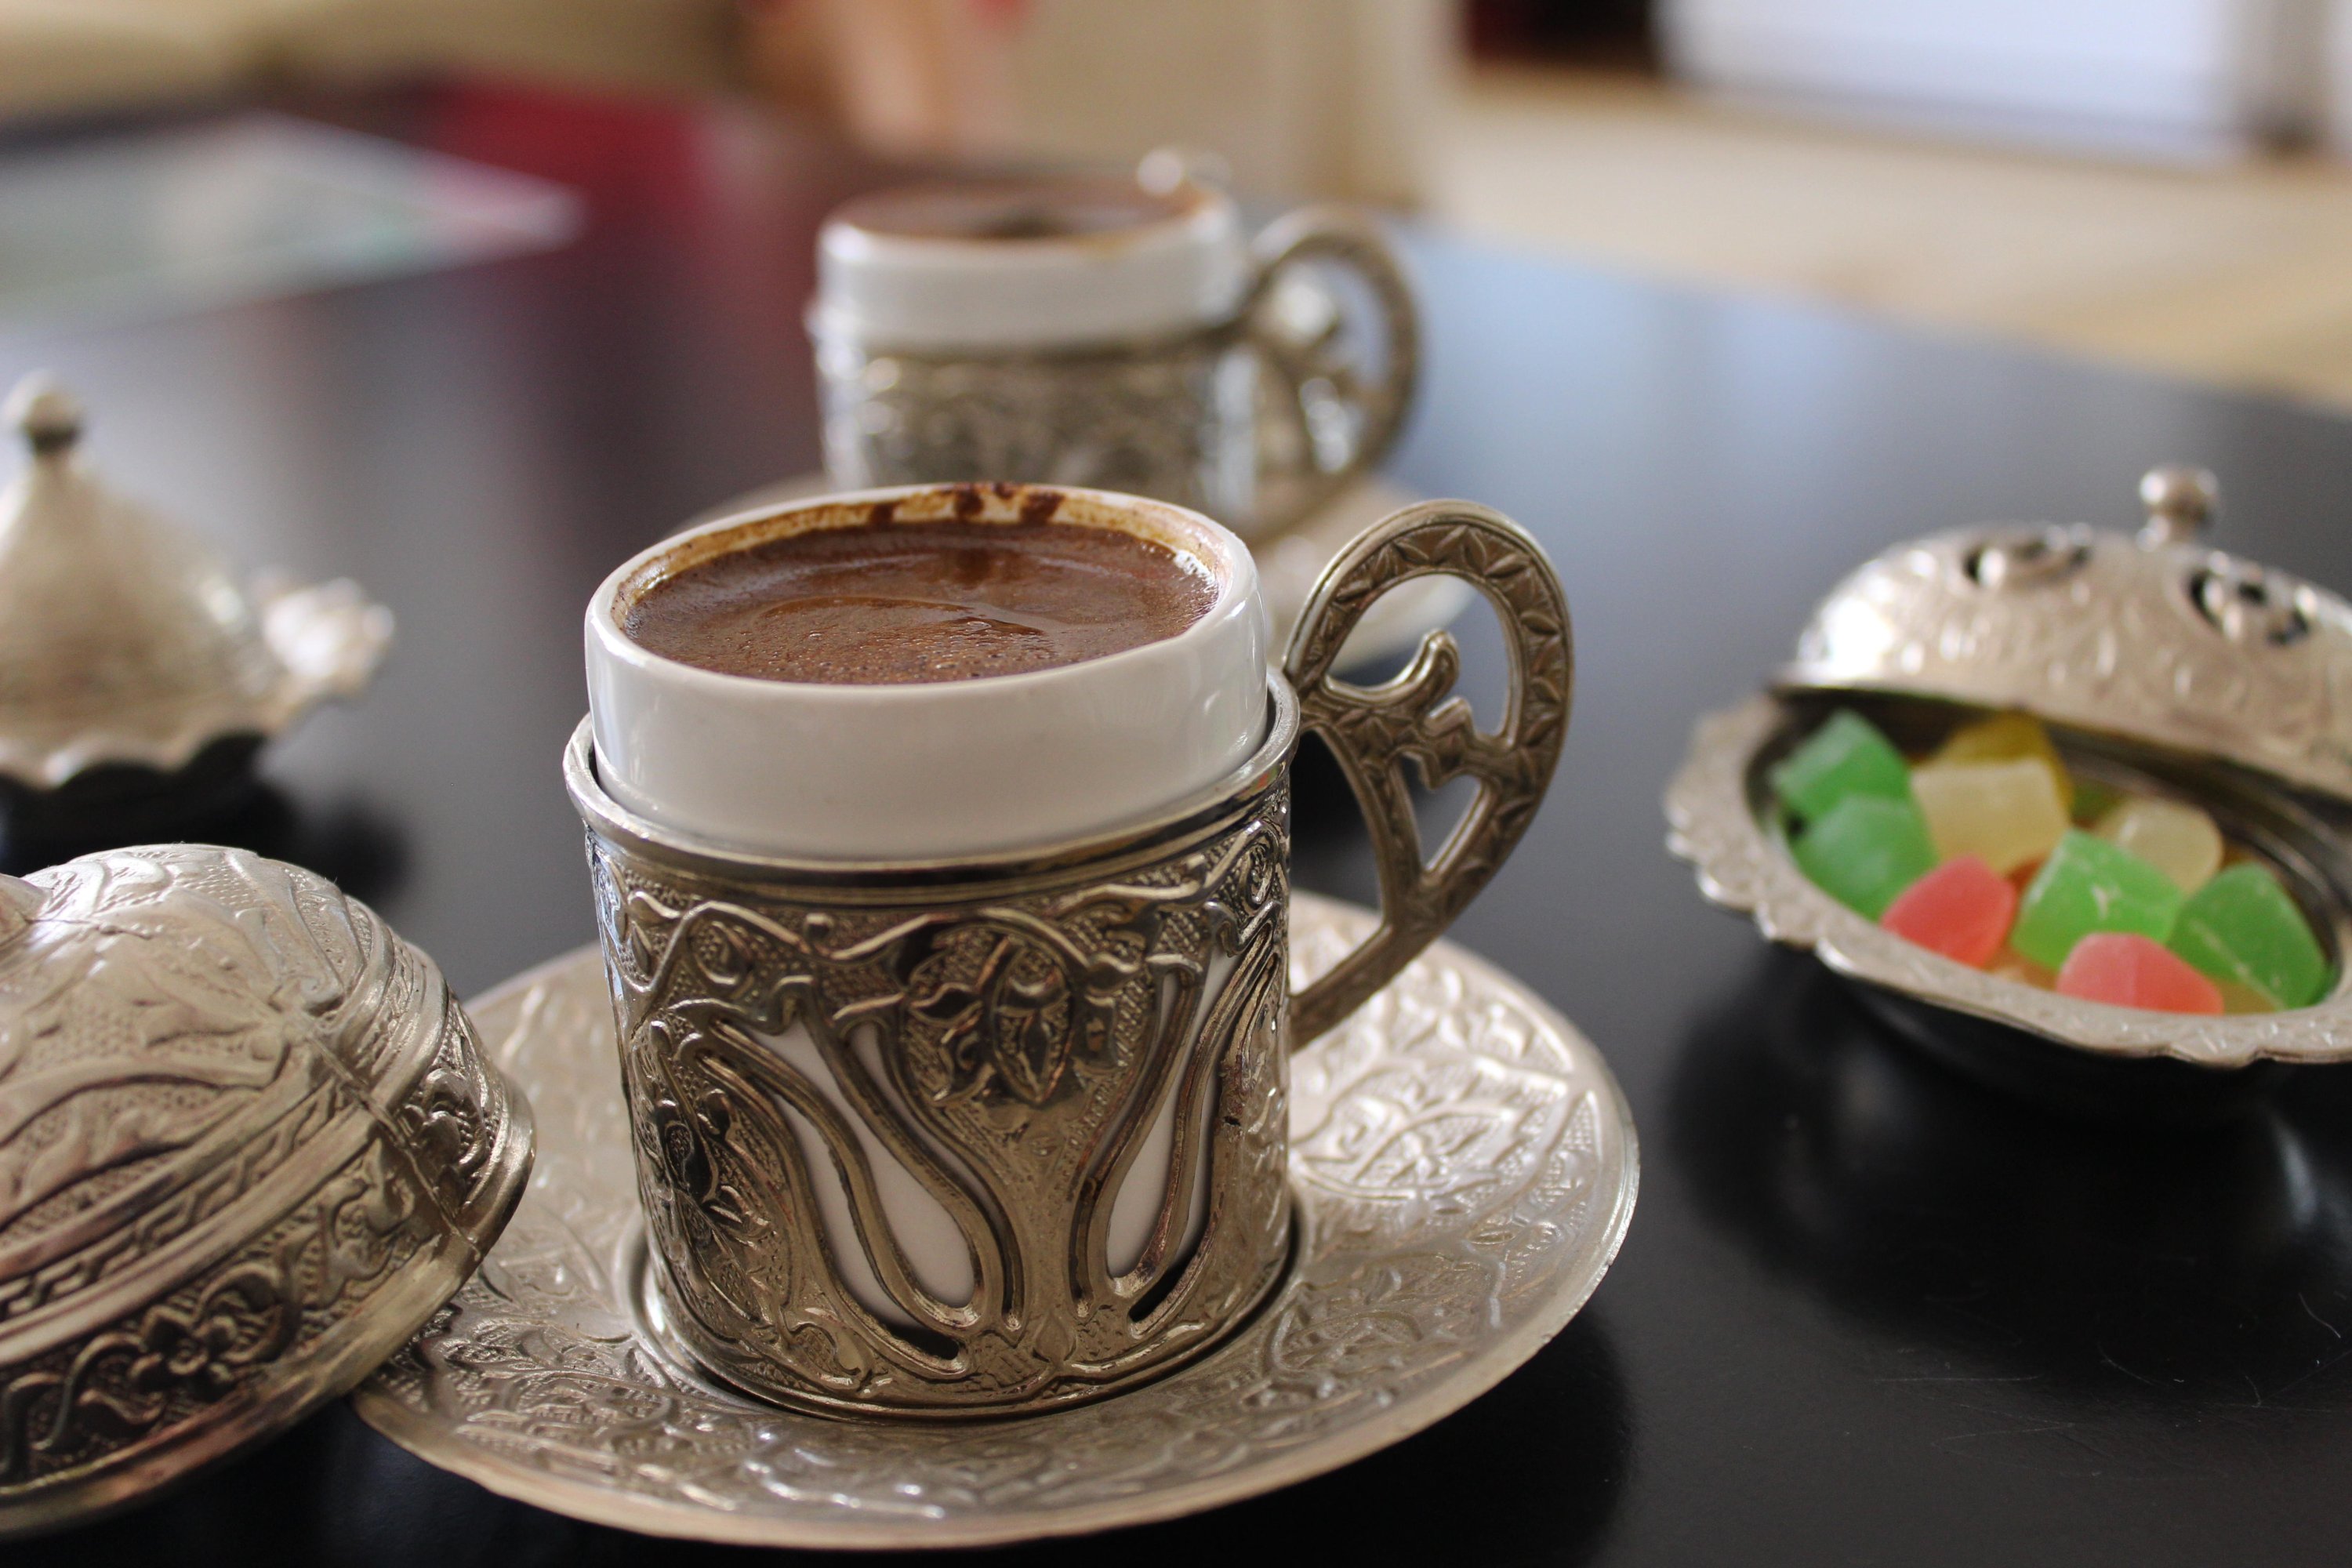  Turkish coffee is usually served with a glass of water and sweets. (Alamy Photo) 